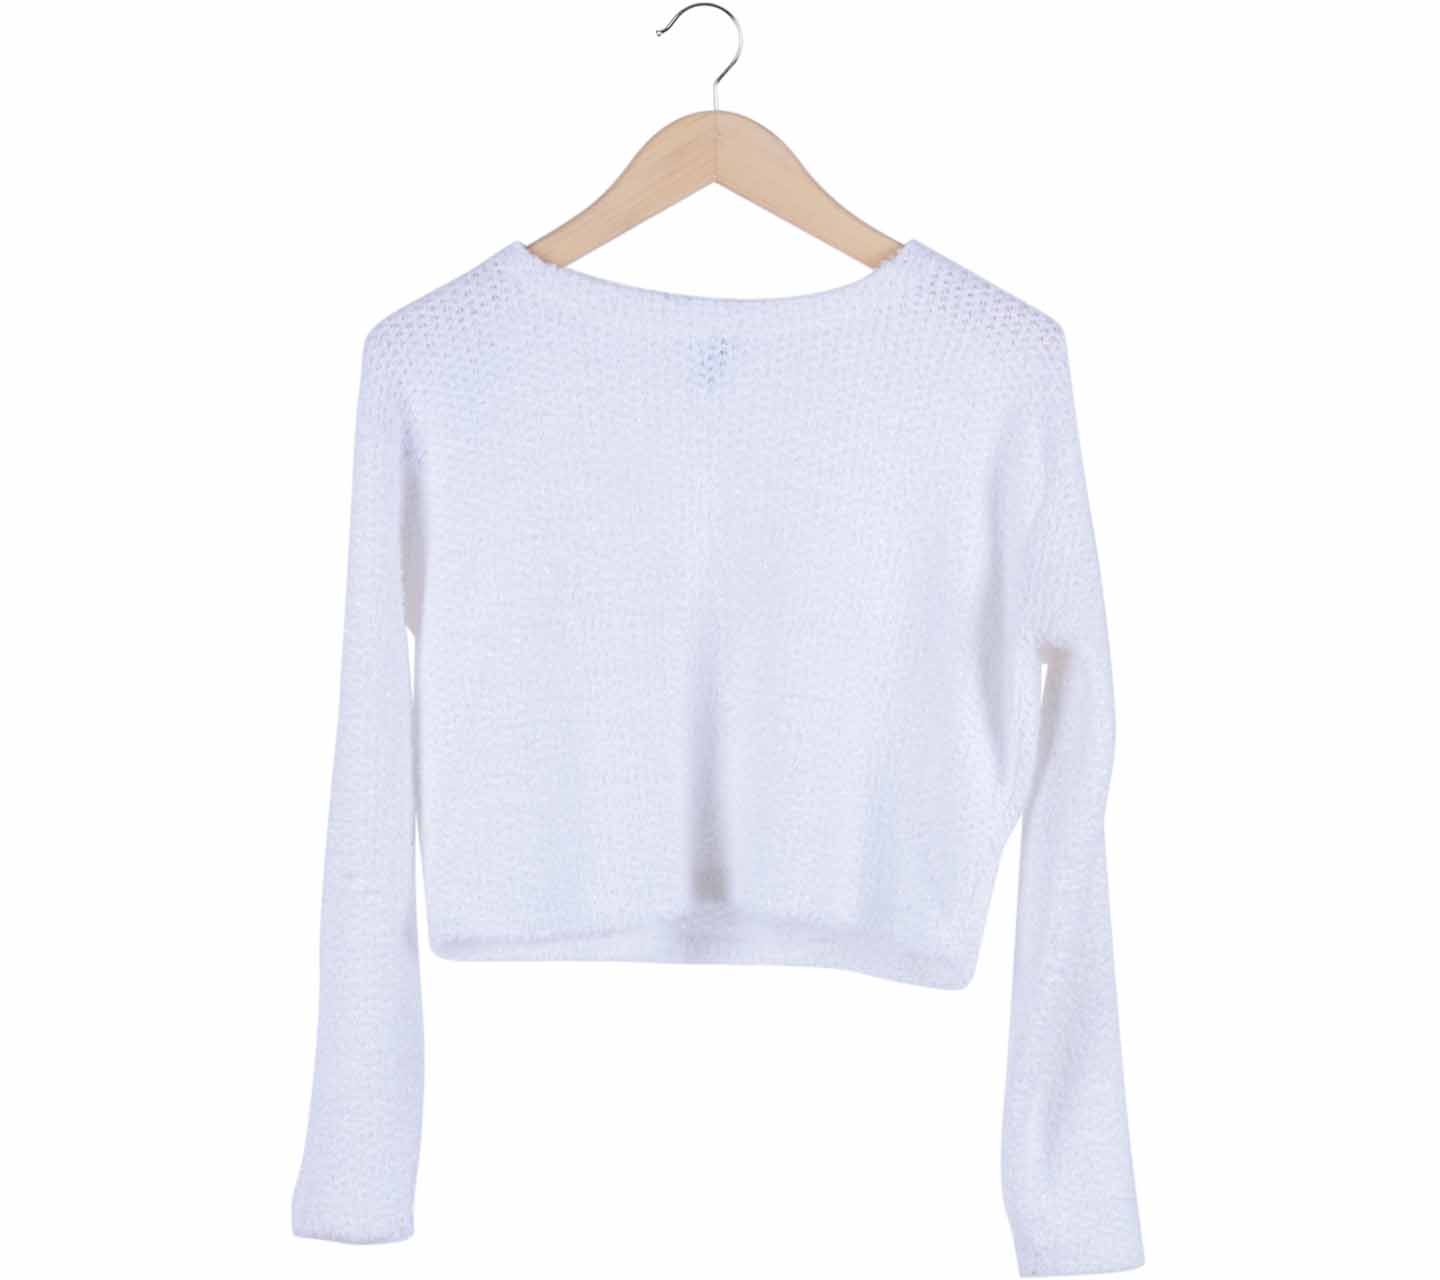 H&M White cropped sweater Sweater